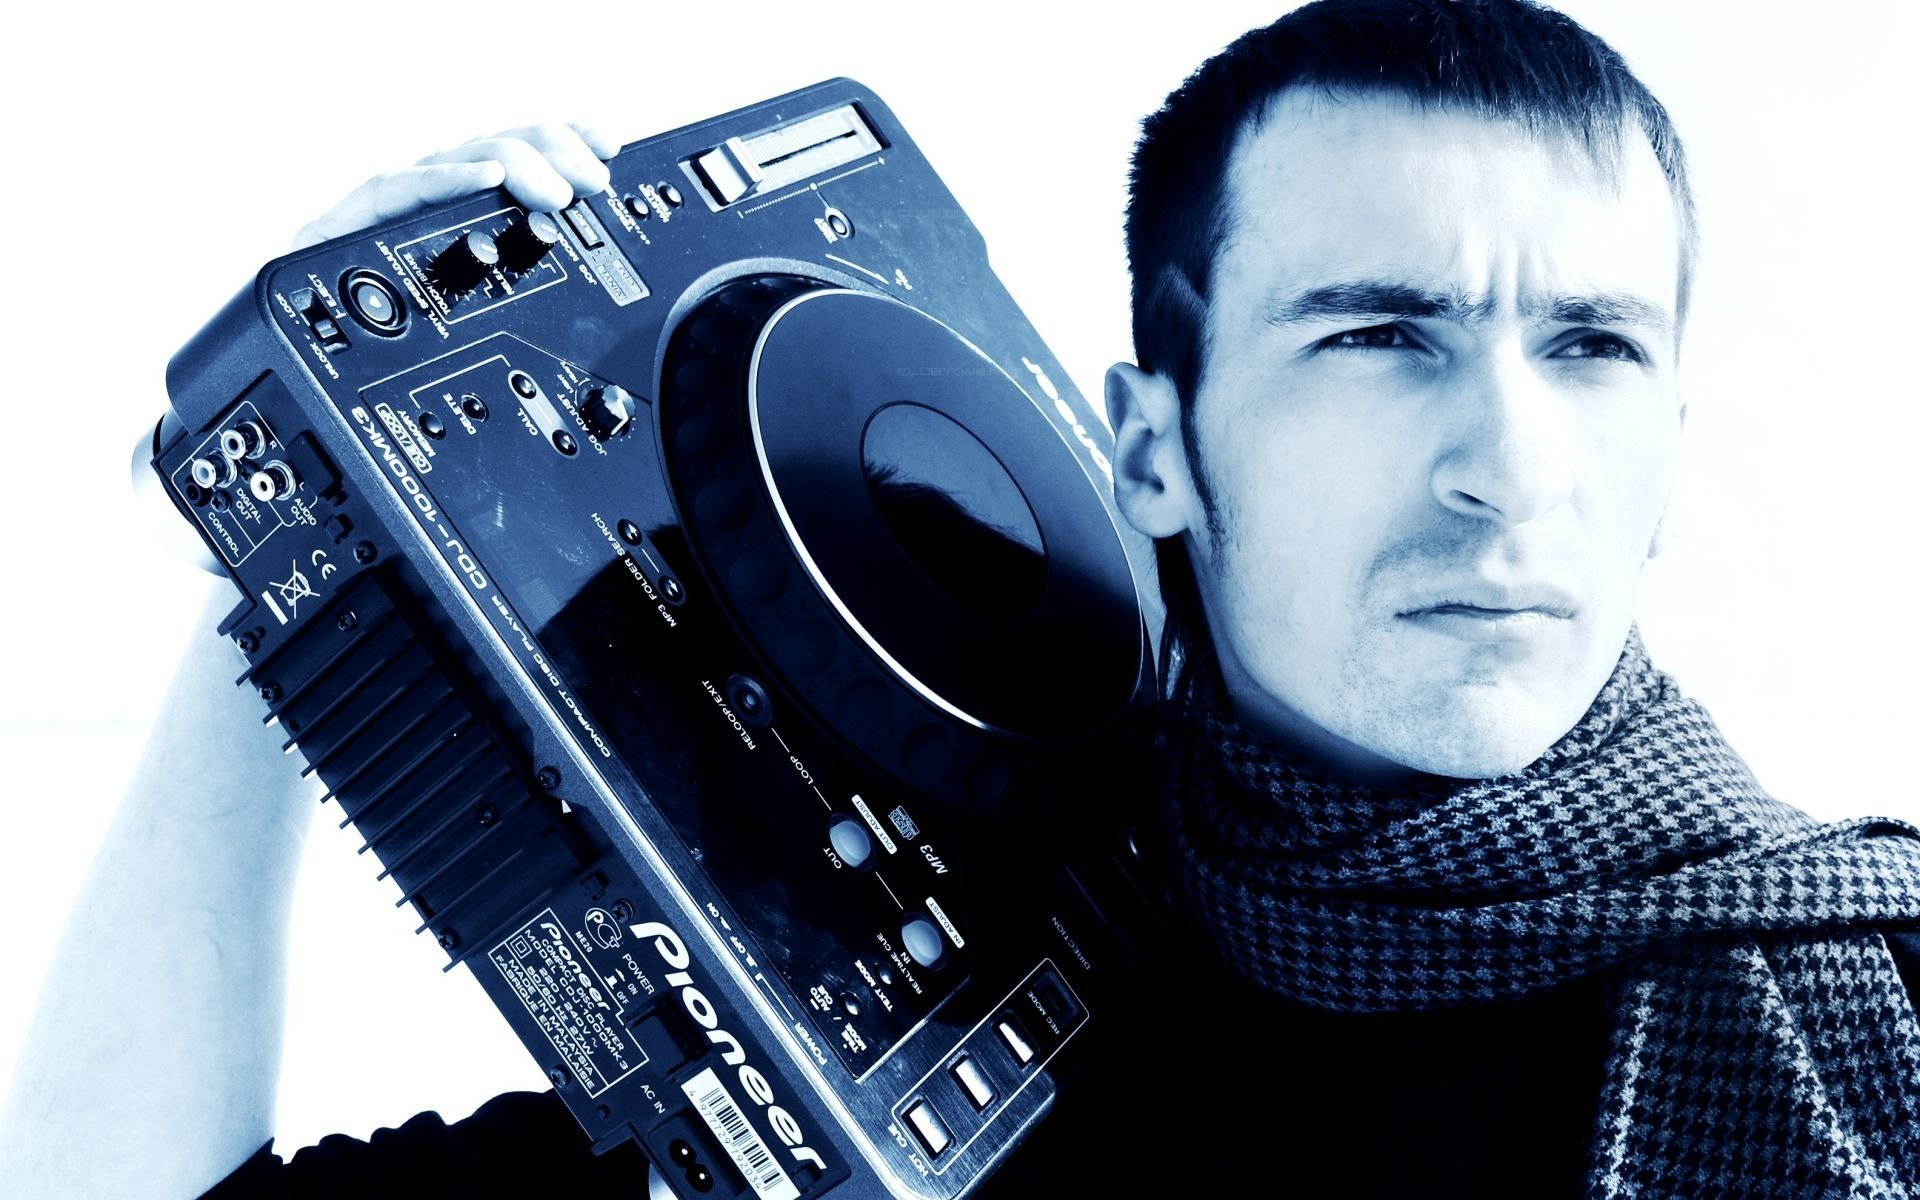 Wallpaper Guy Boombox - Photography , HD Wallpaper & Backgrounds